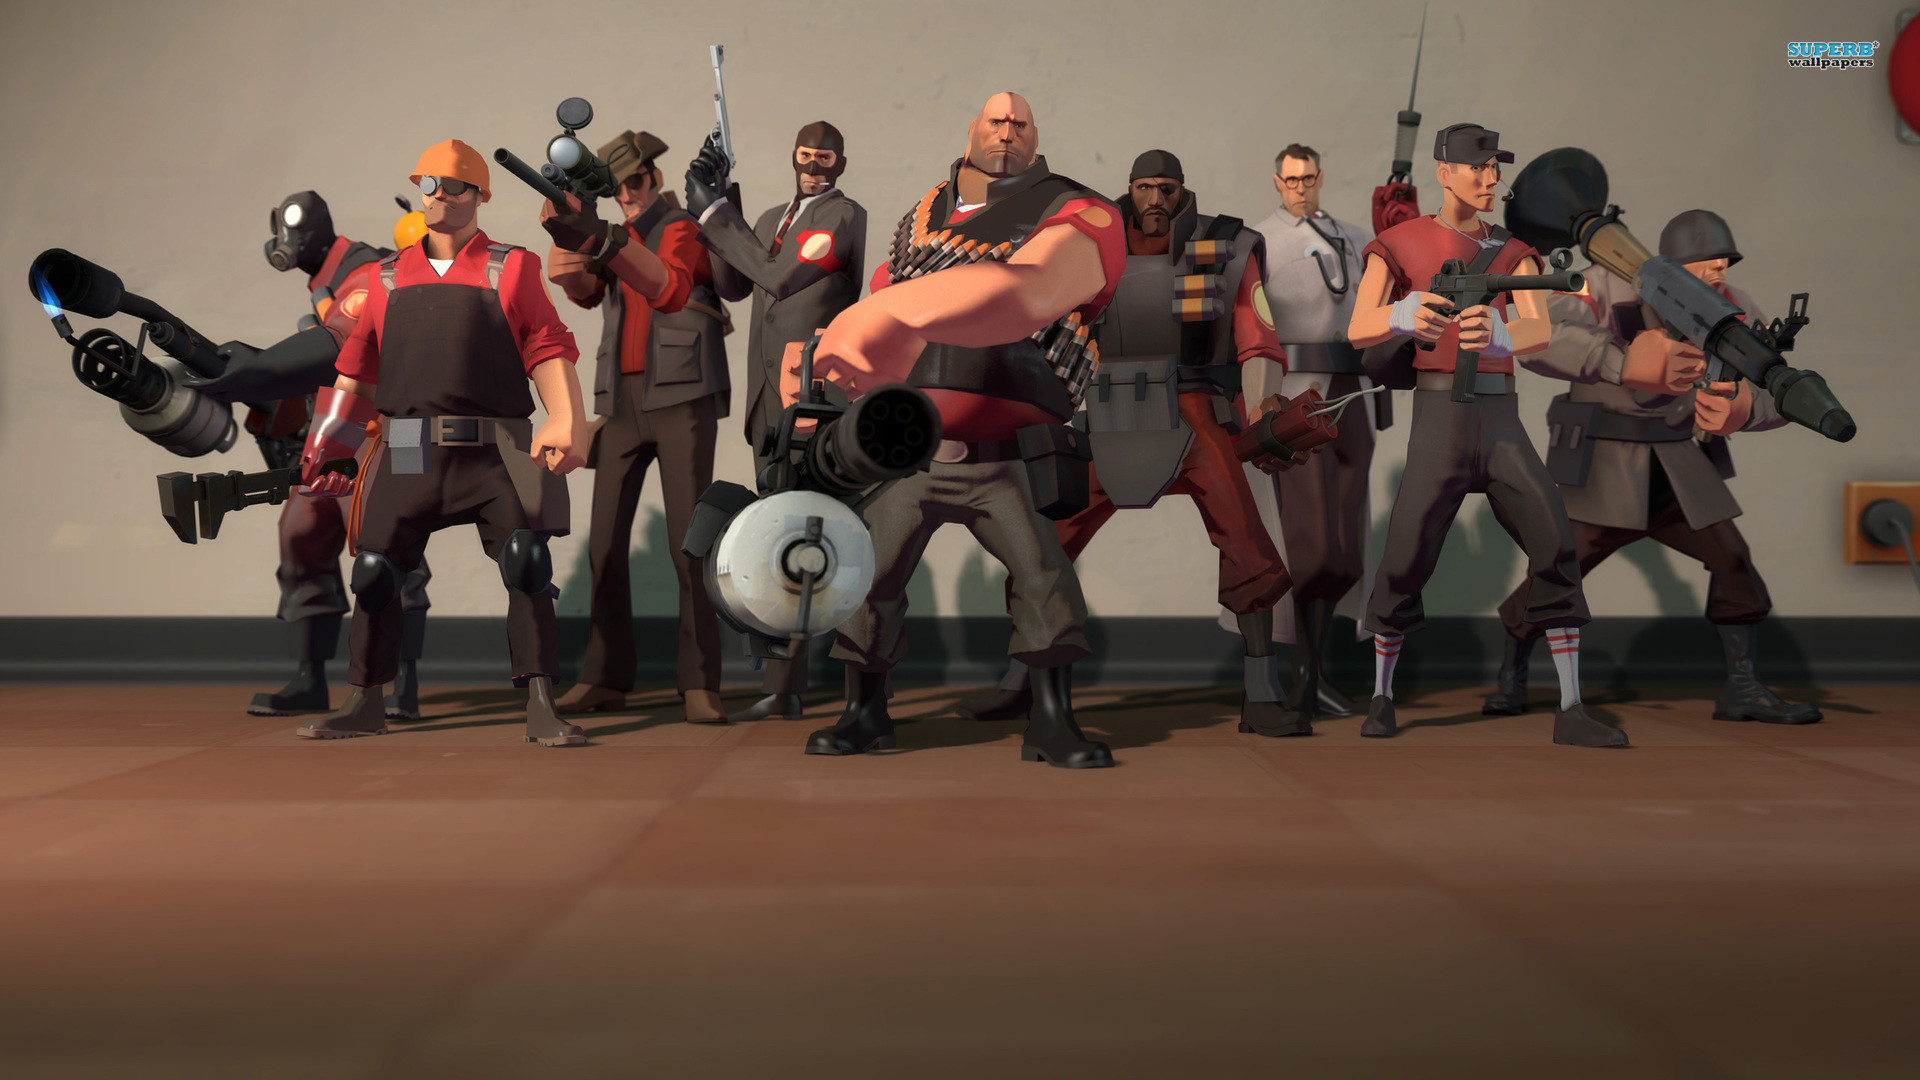 1920x1080 Team Fortress 2 wallpapers (17 Wallpapers)